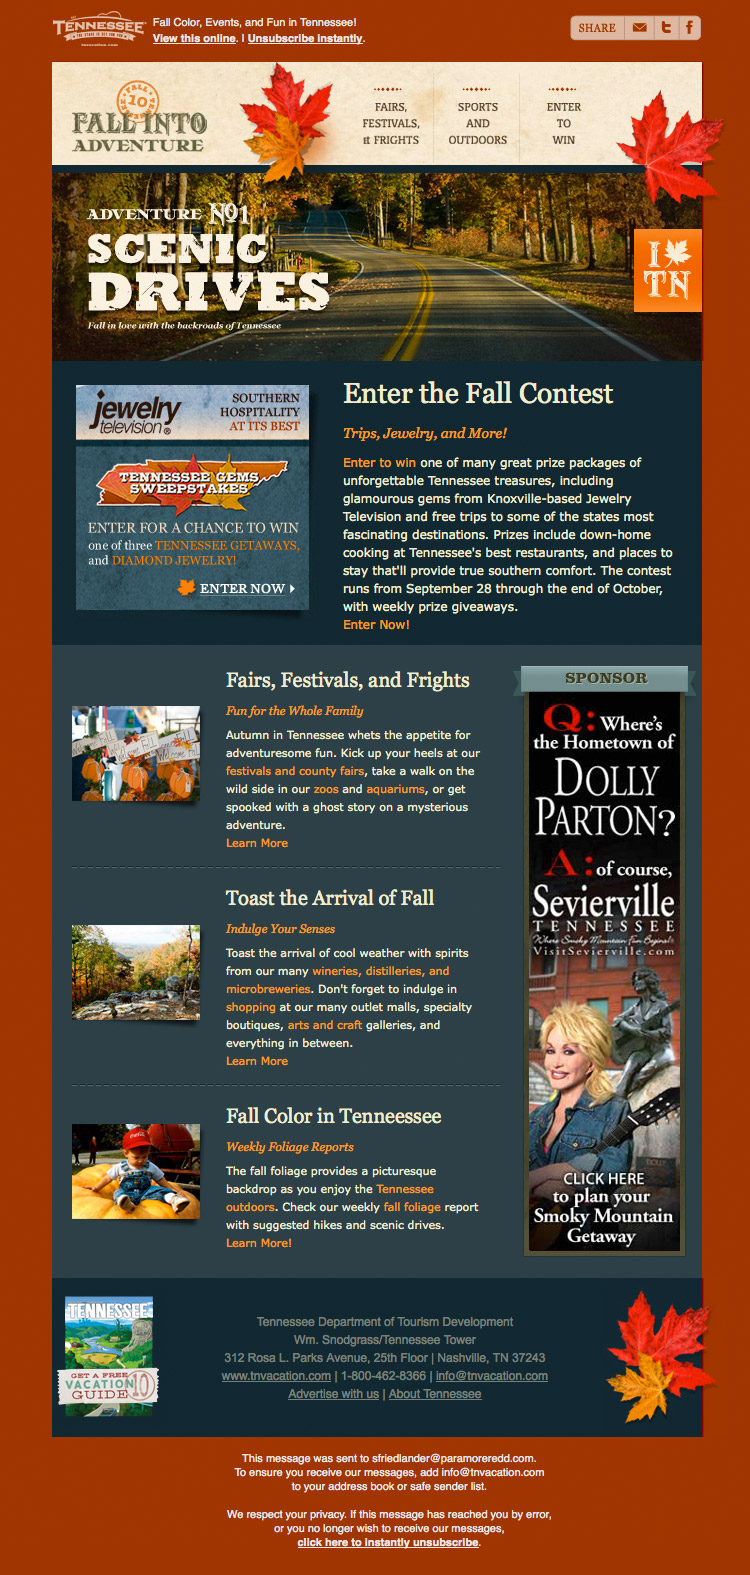 Fall Into Adventure Tennessee promo email